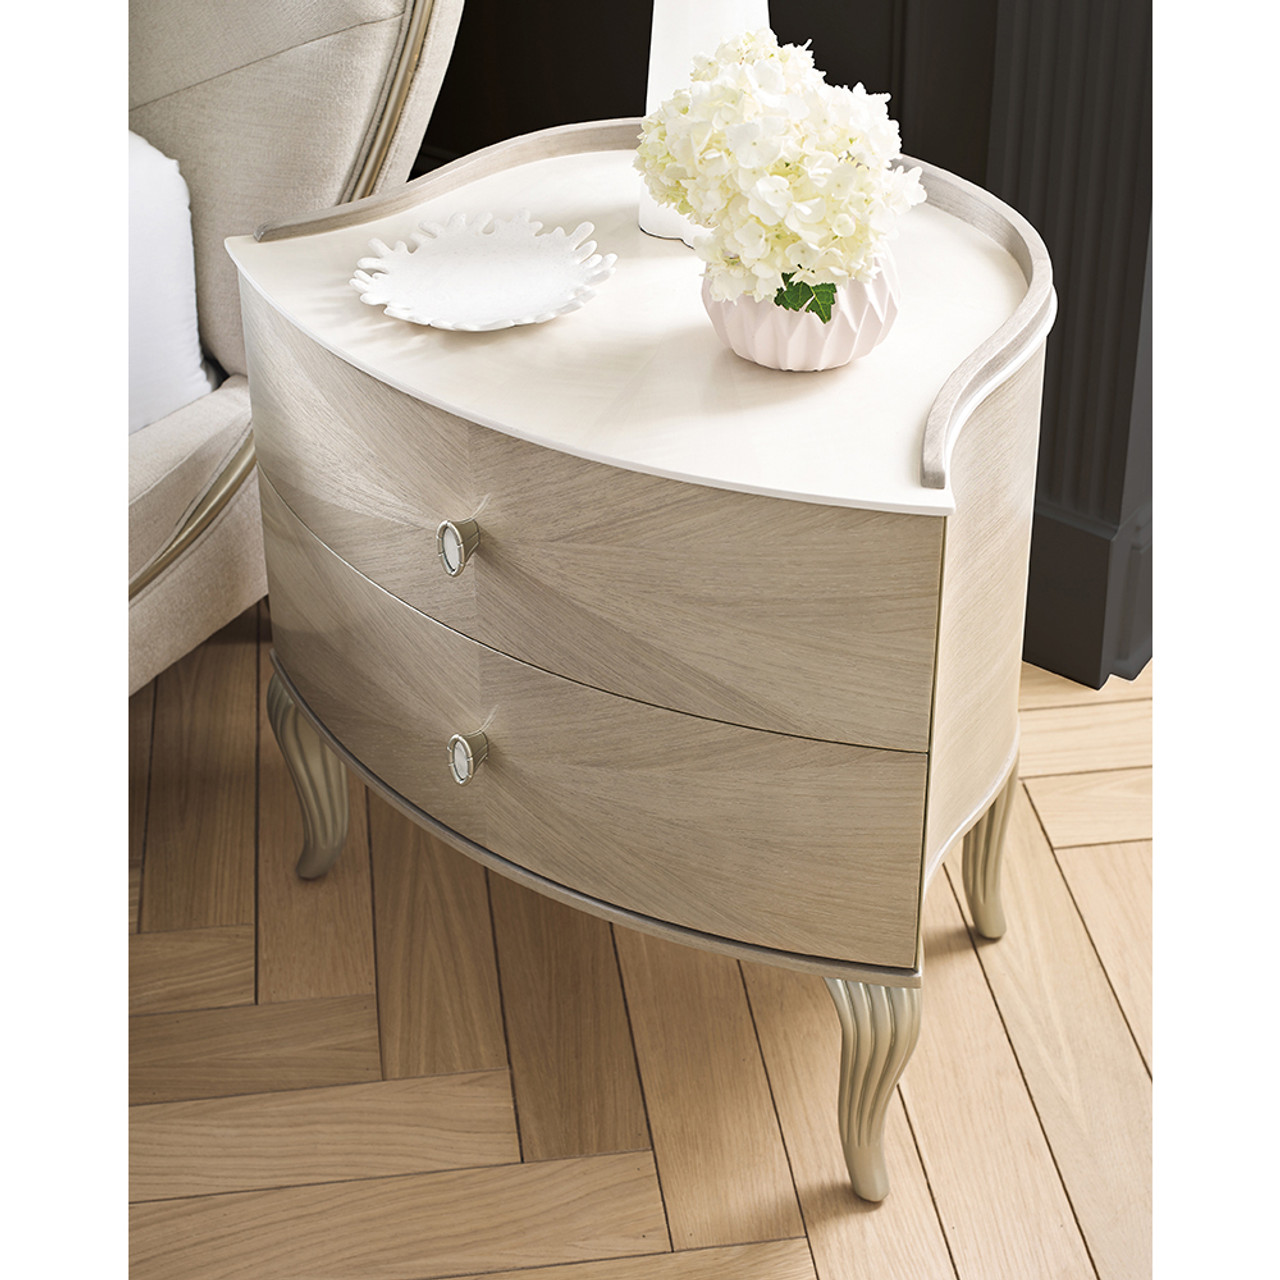 Caracole Lillian Small Drawer Nightstand